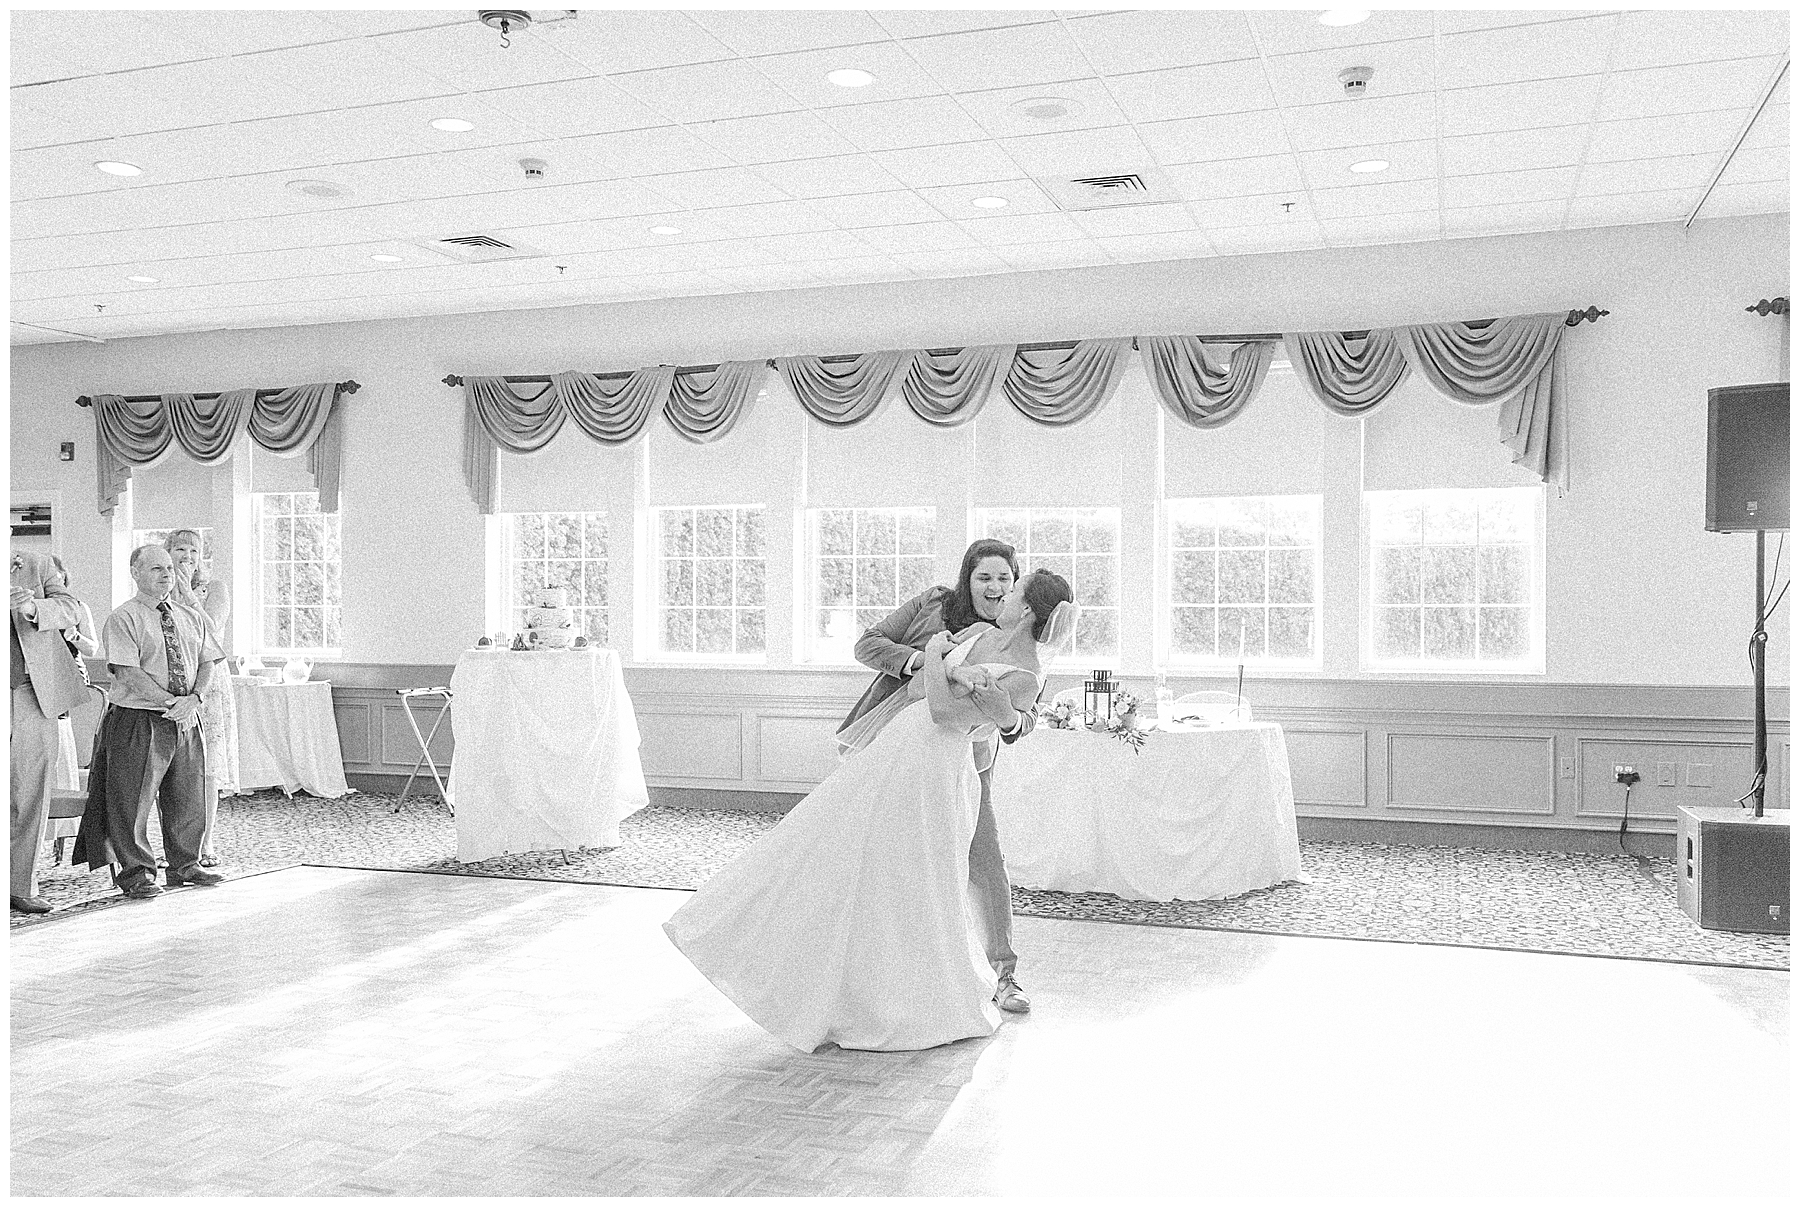 newlyweds share first dance at wedding reception